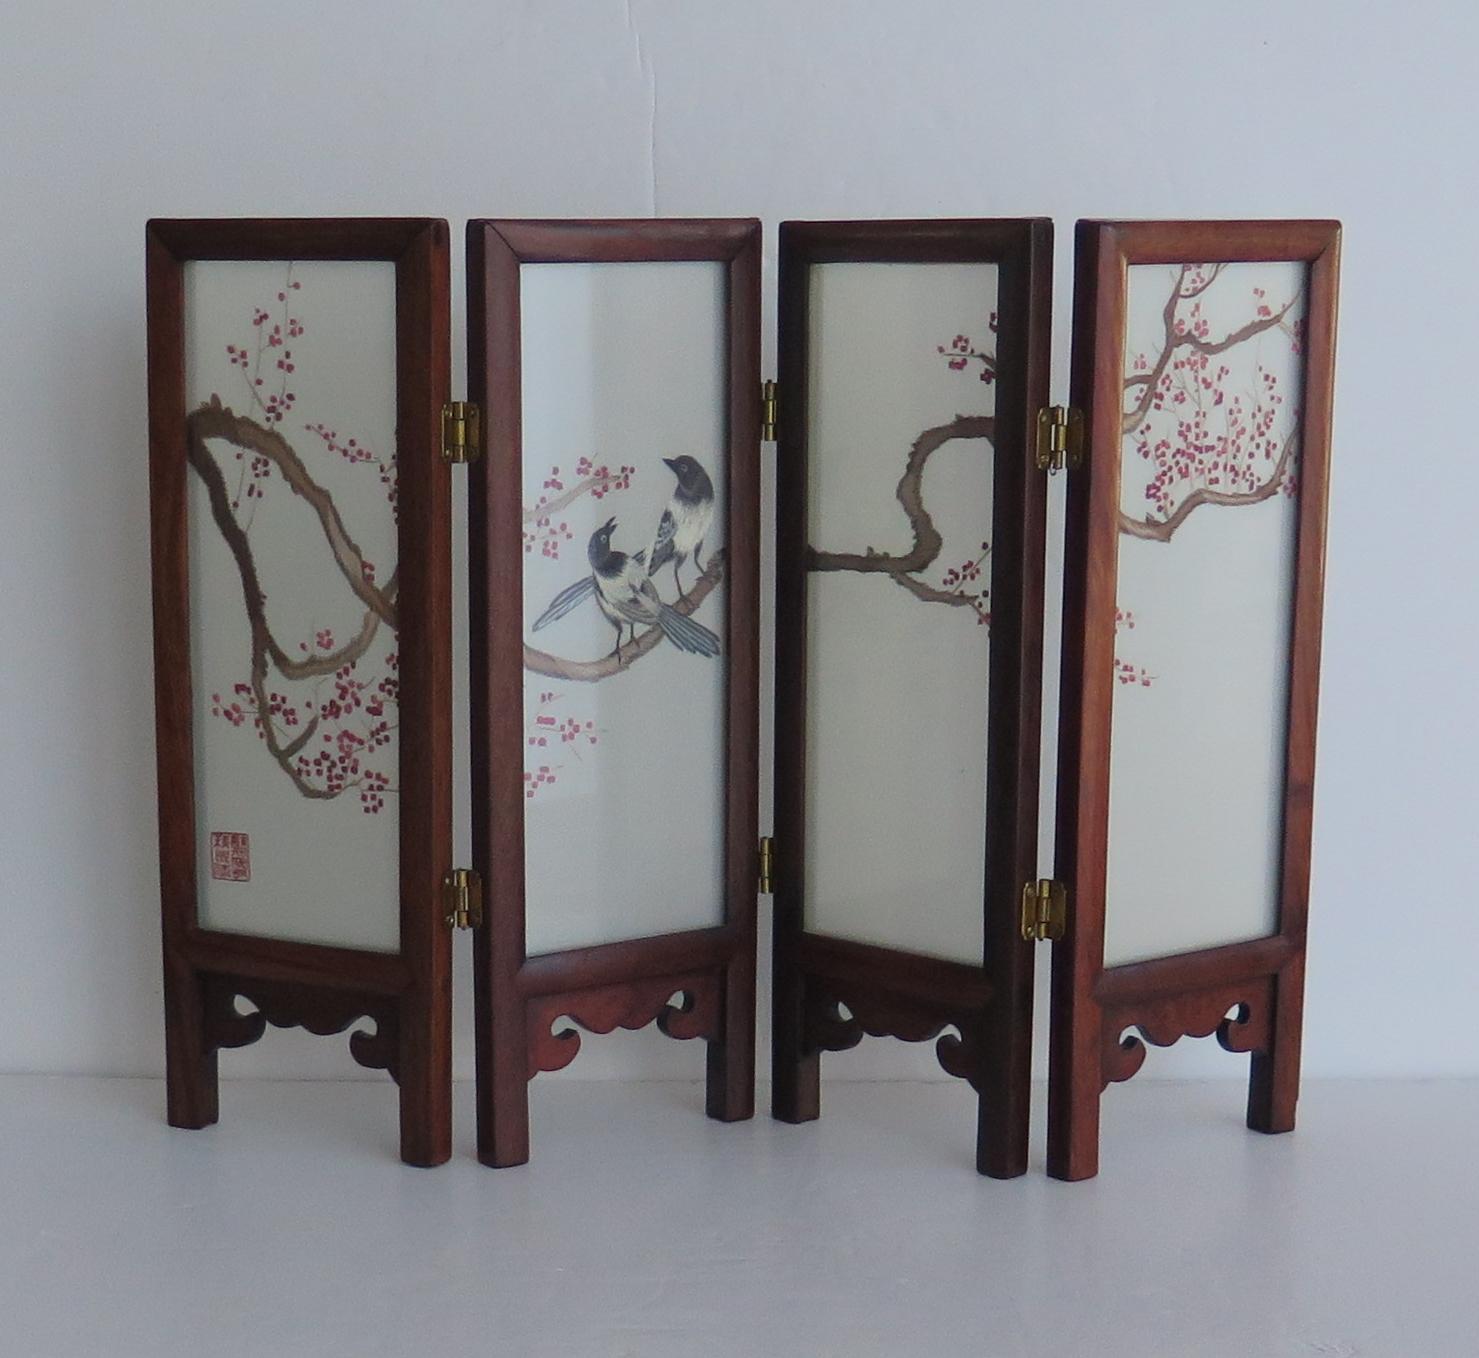 This is a very decorative Chinese folding desk or table screen with hardwood frame and silk panels with hand embroidered decoration, dating to circa 1960s 

The piece is all hand made. 

It has four panel screens with hardwood mitre jointed frames,